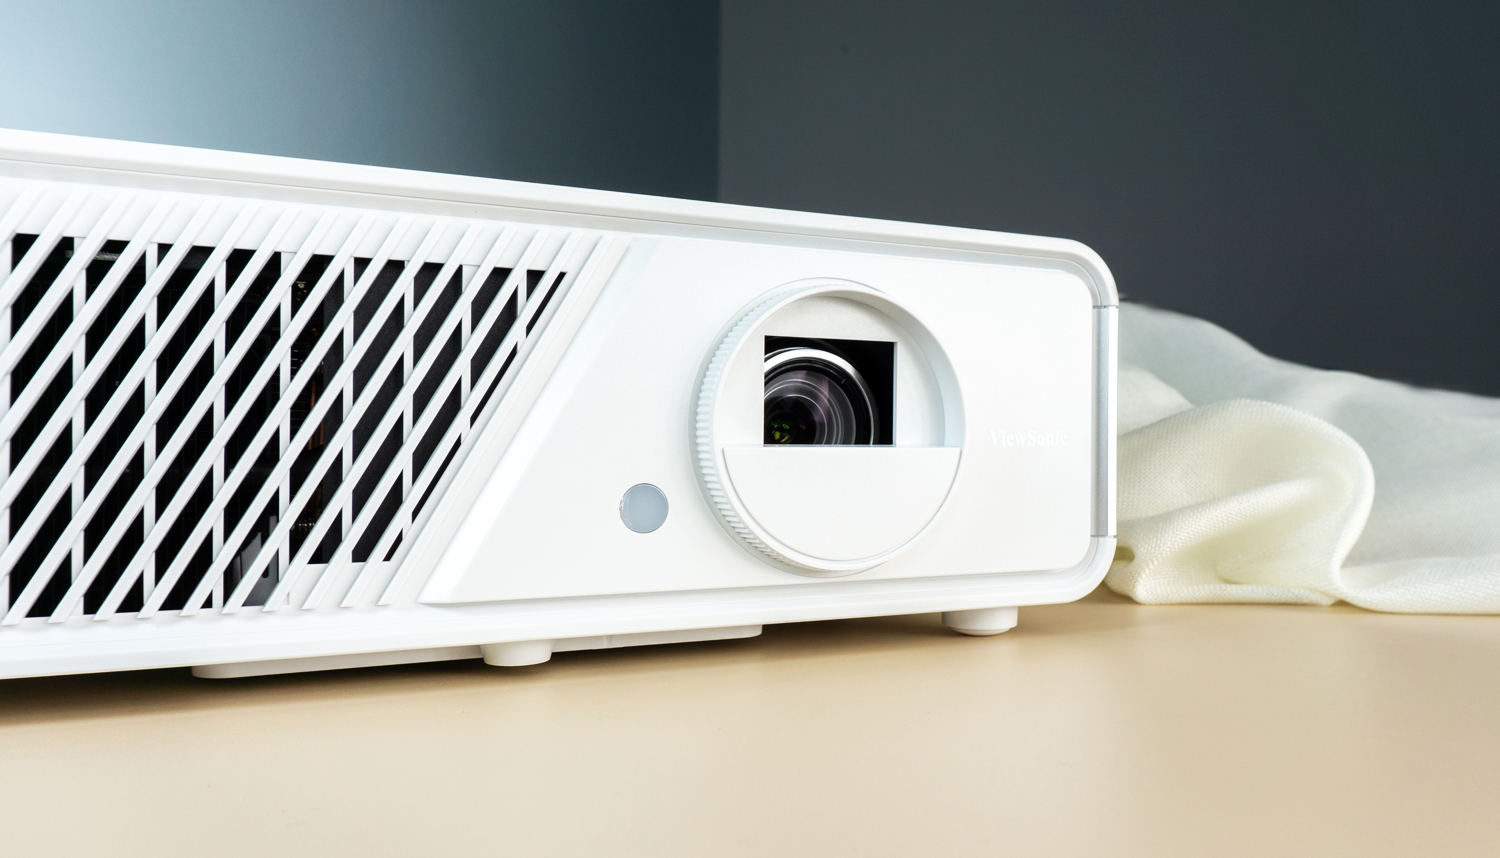 With 120Hz high brush, 0.65 chip and low-latency input: ViewSonic Q20 projector detailed review